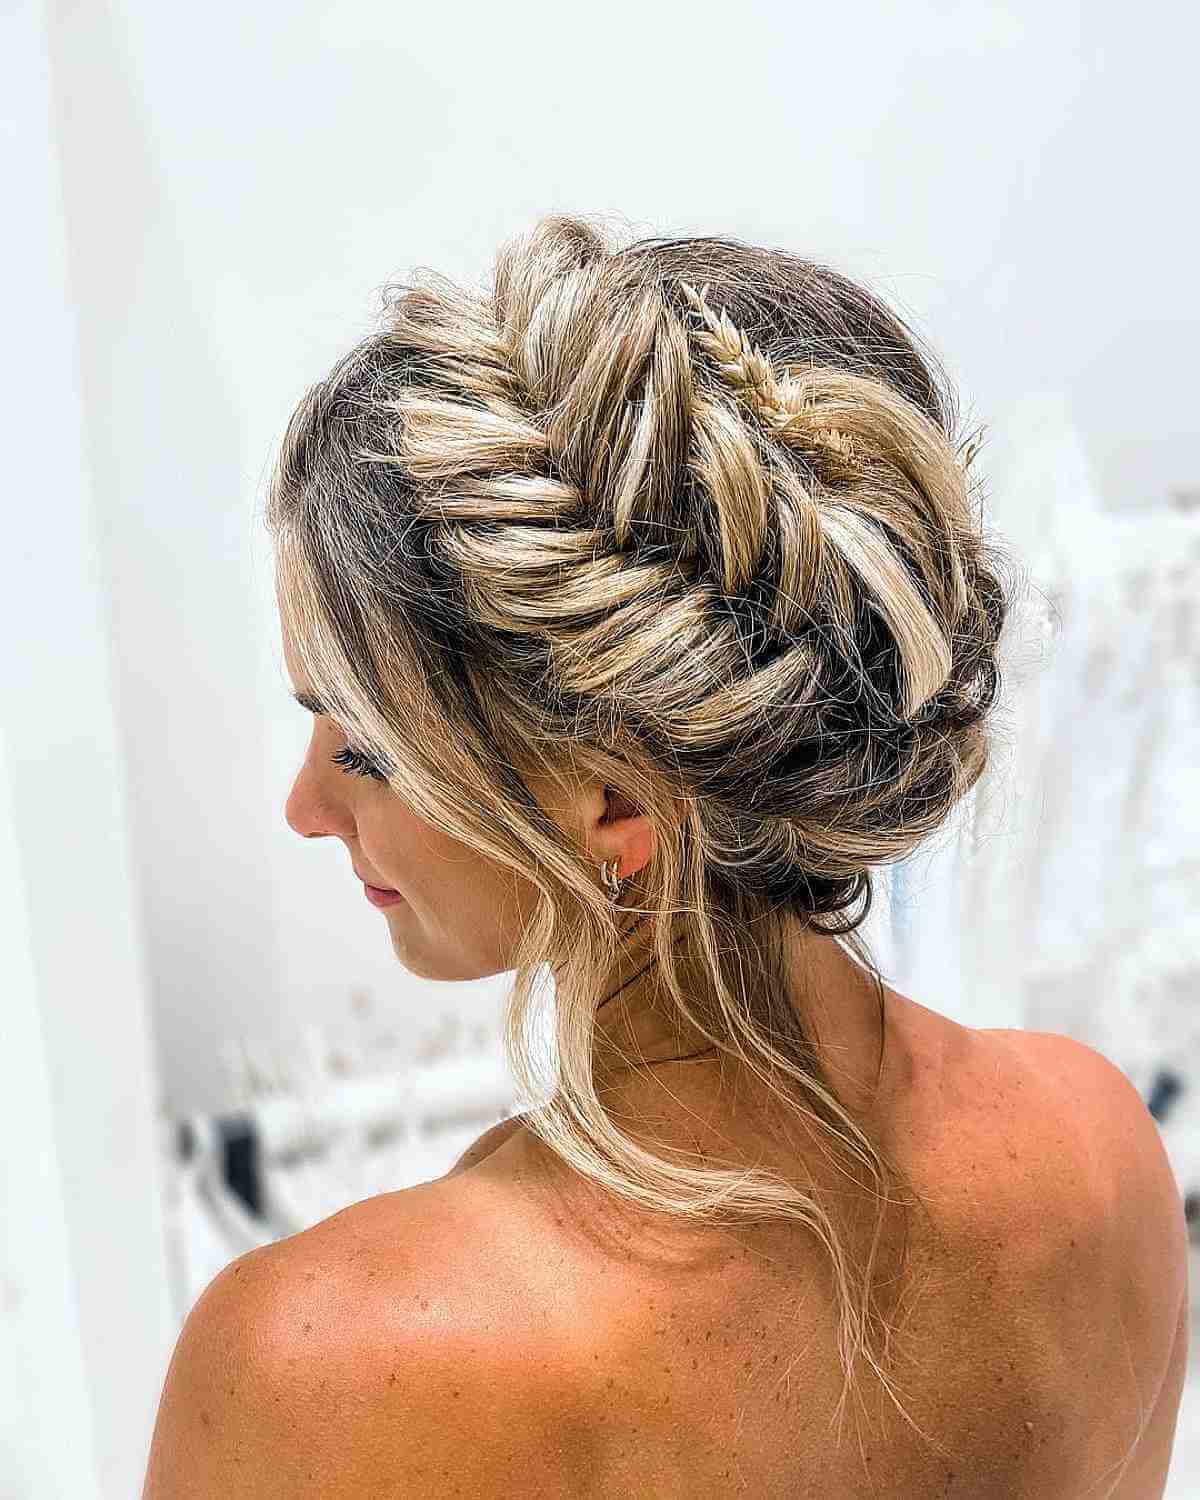 Braided fishtail updo hairstyle